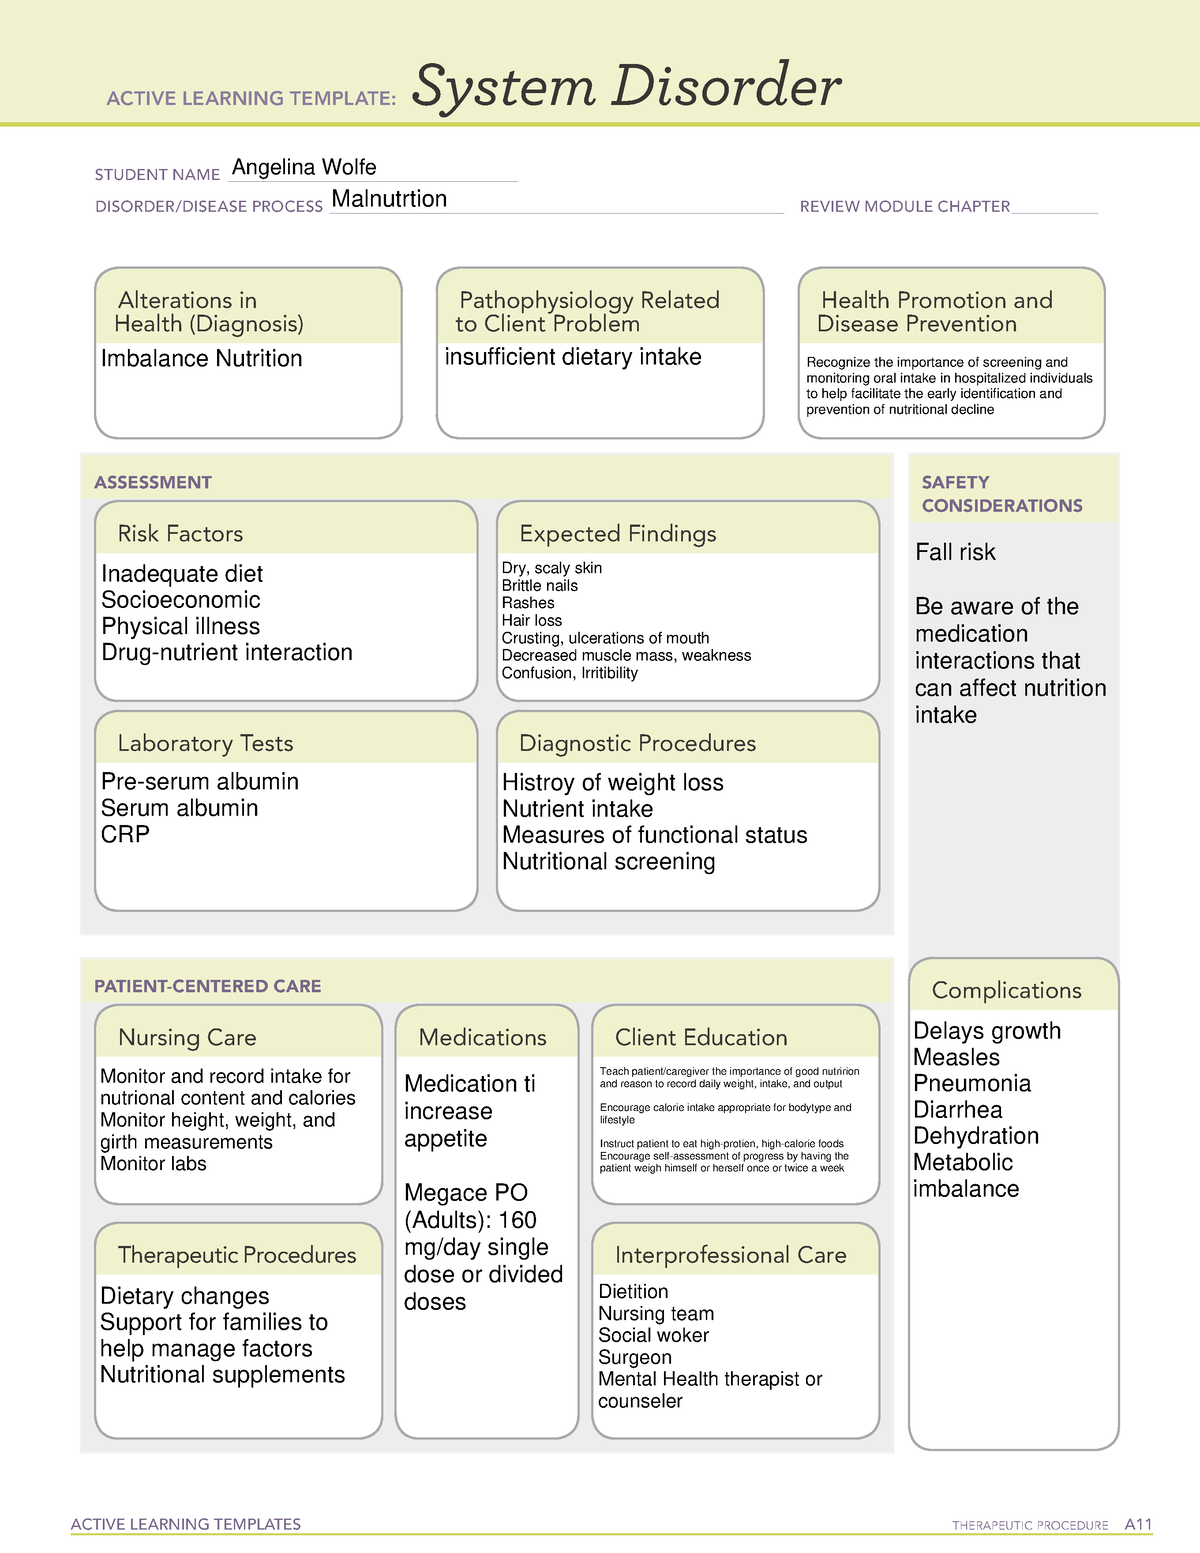 Malnutrition system disorder temp - ACTIVE LEARNING TEMPLATES ...